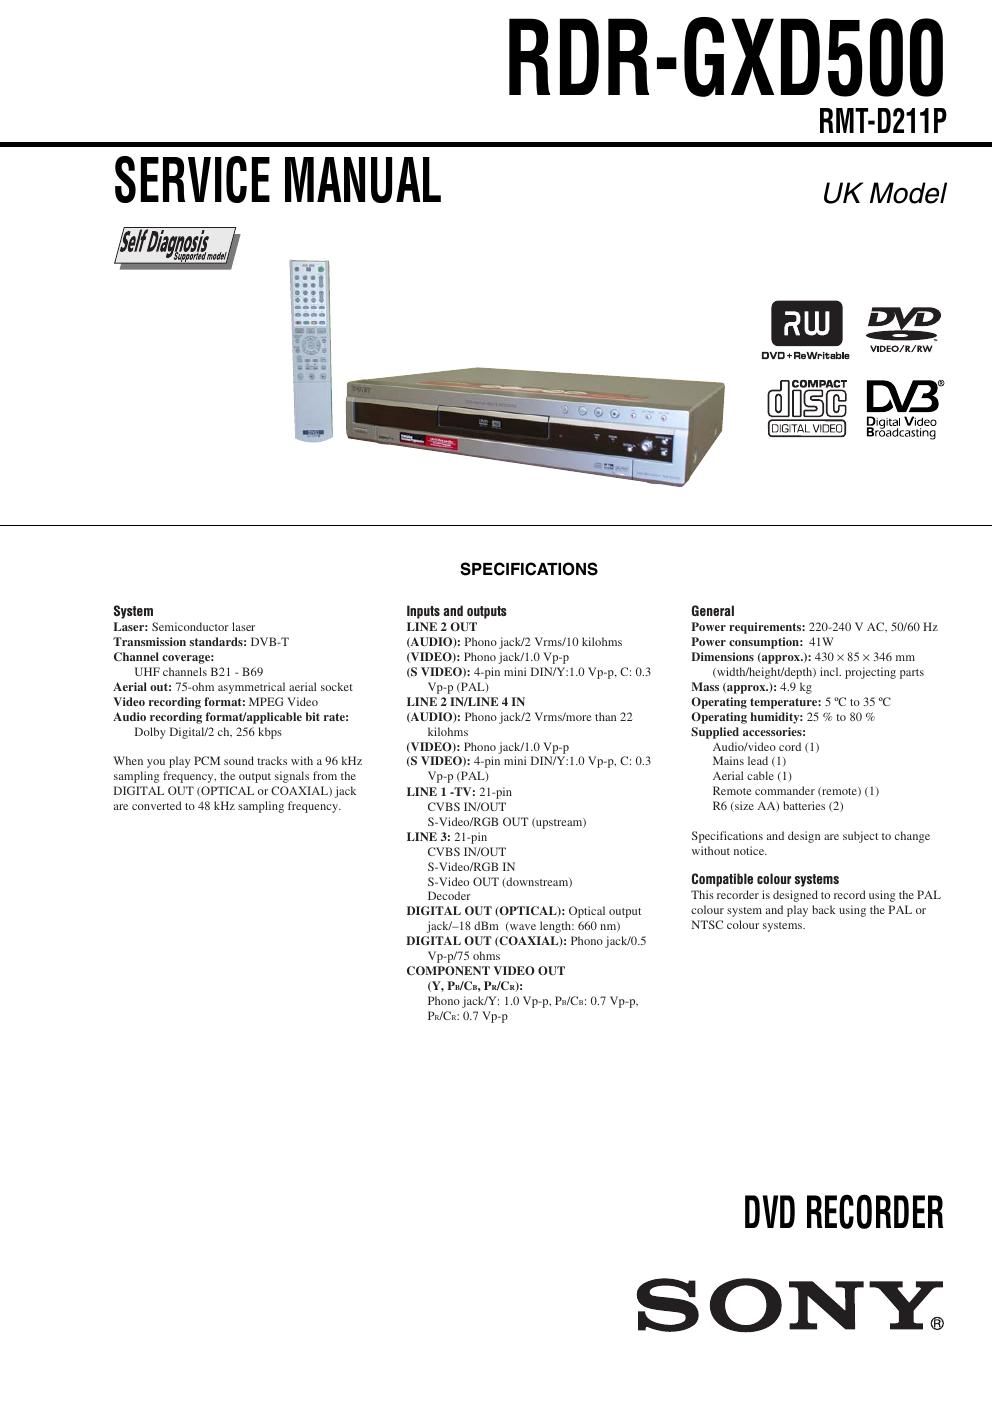 sony rdr gxd 500 service manual